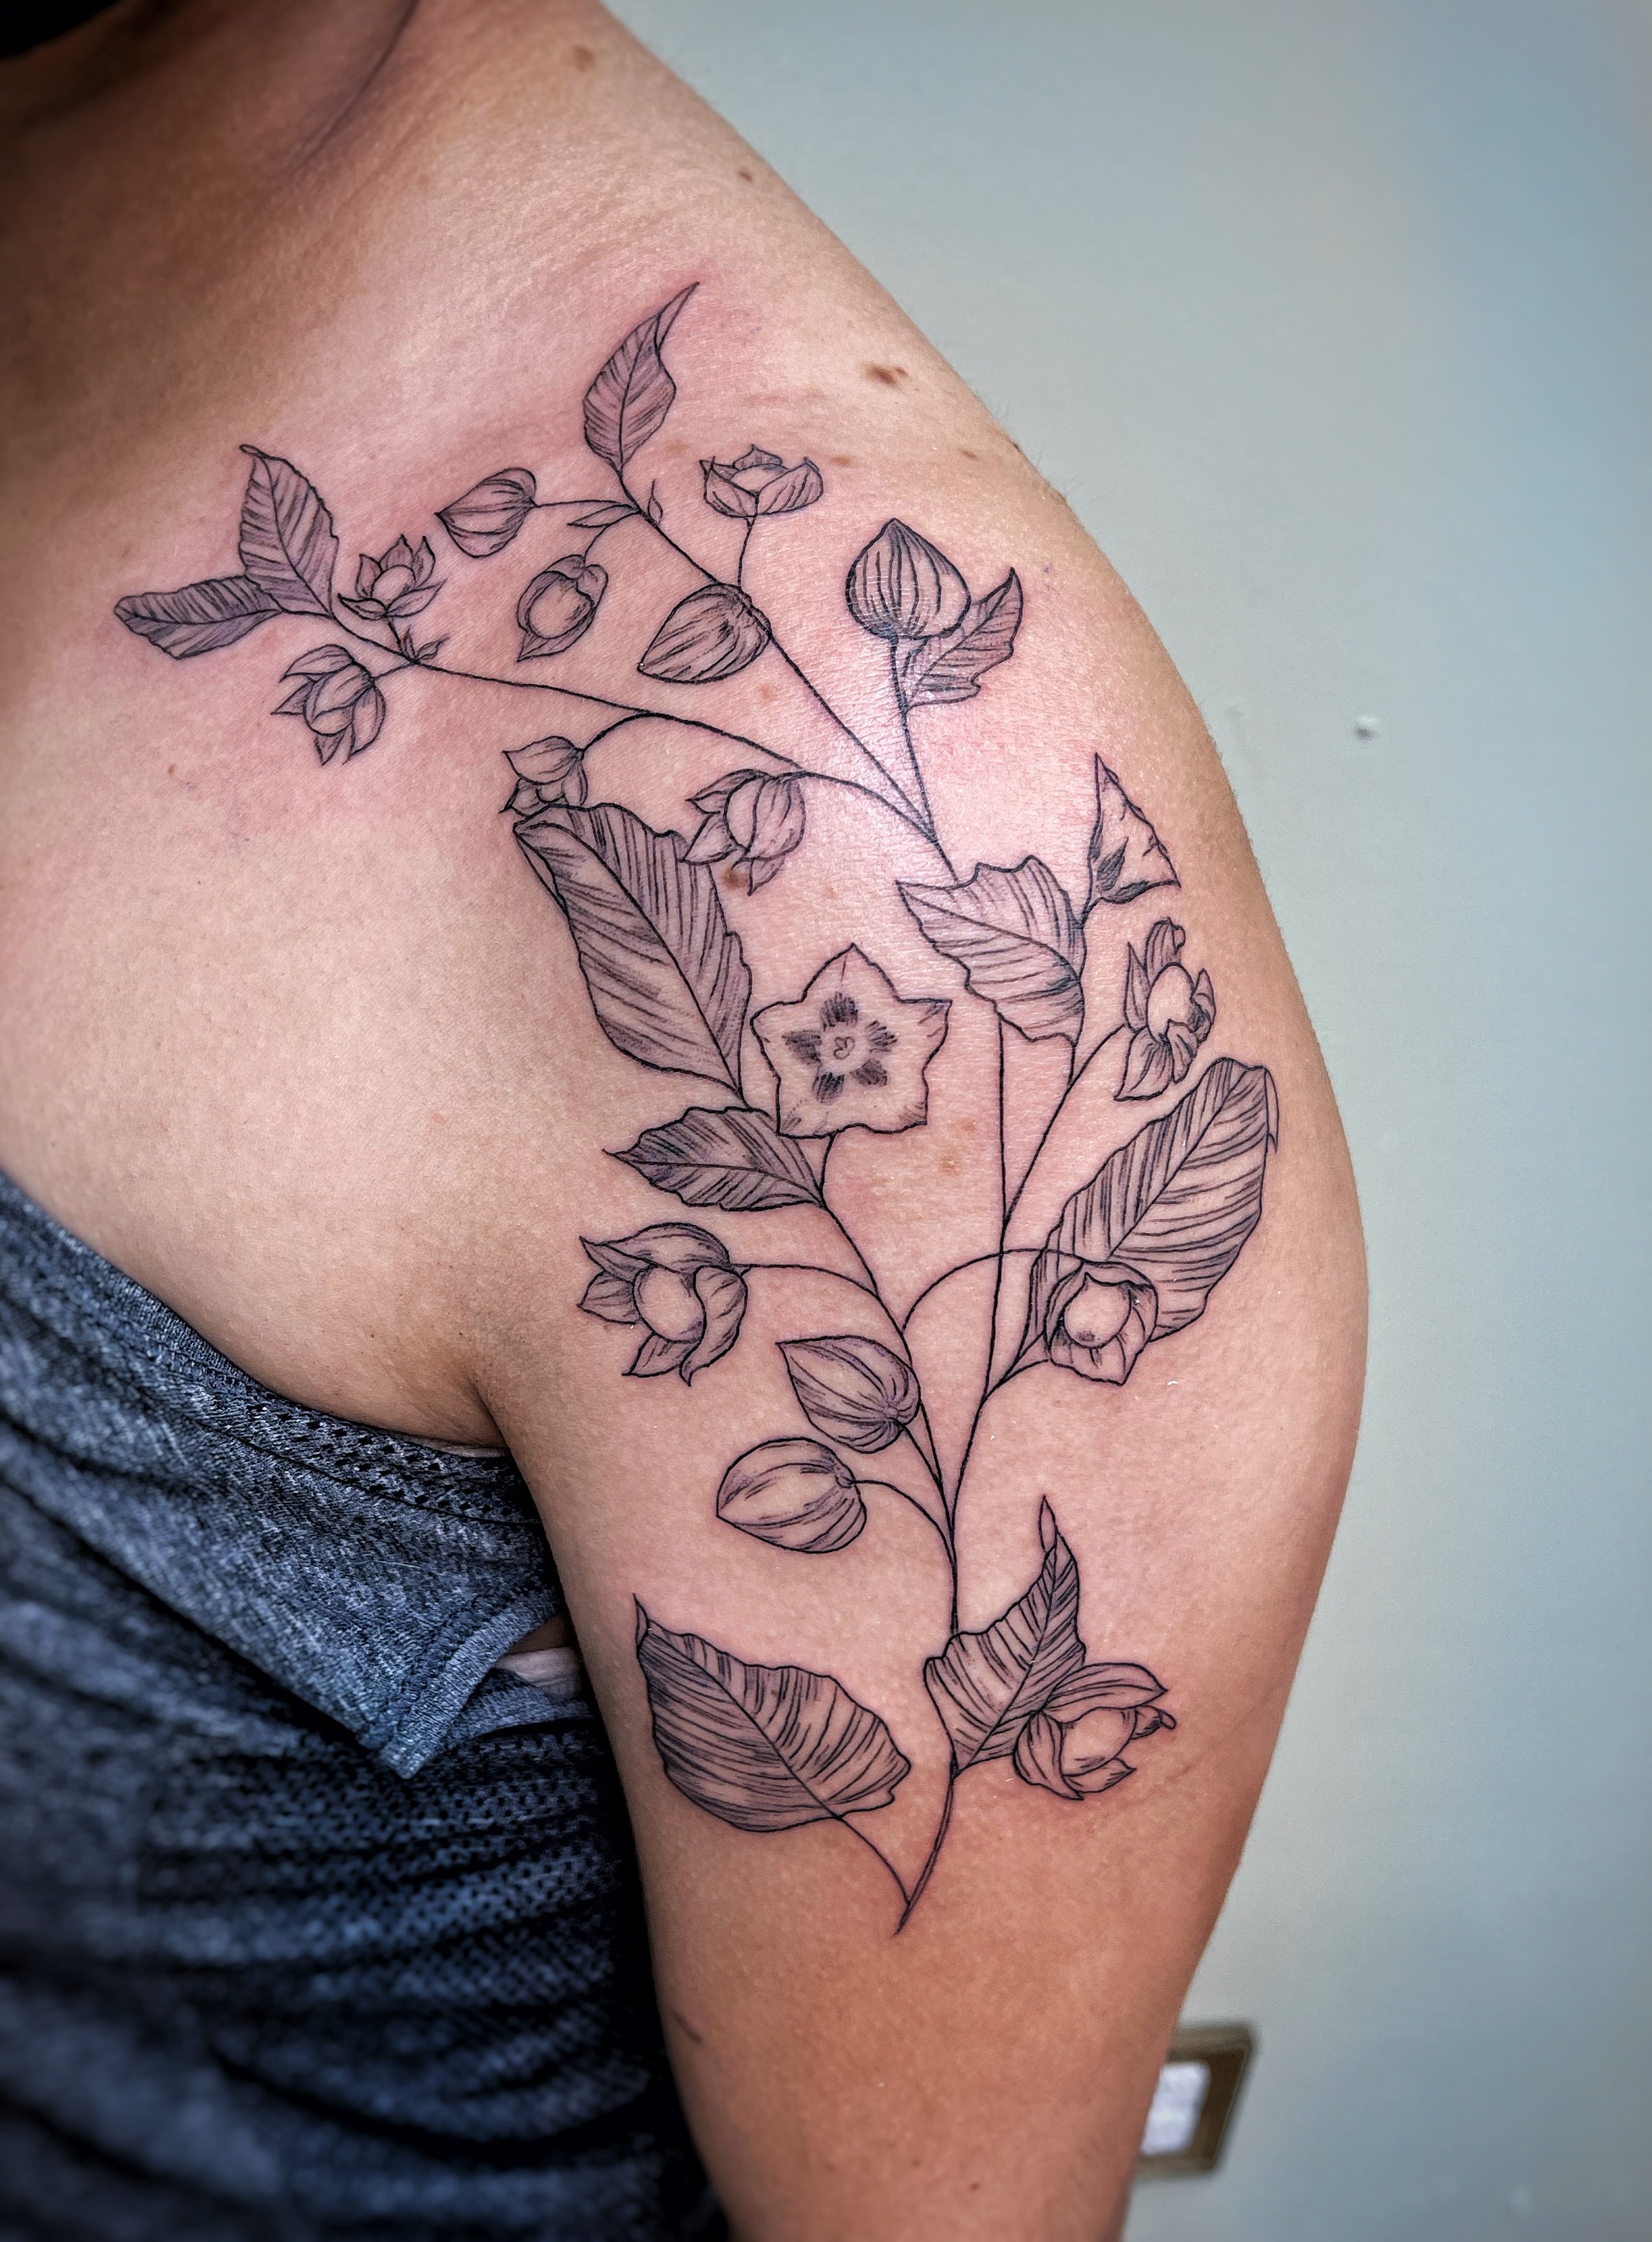 50 Amazing Magnolia Tattoo Designs with Meanings Ideas and Celebrities   Body Art Guru